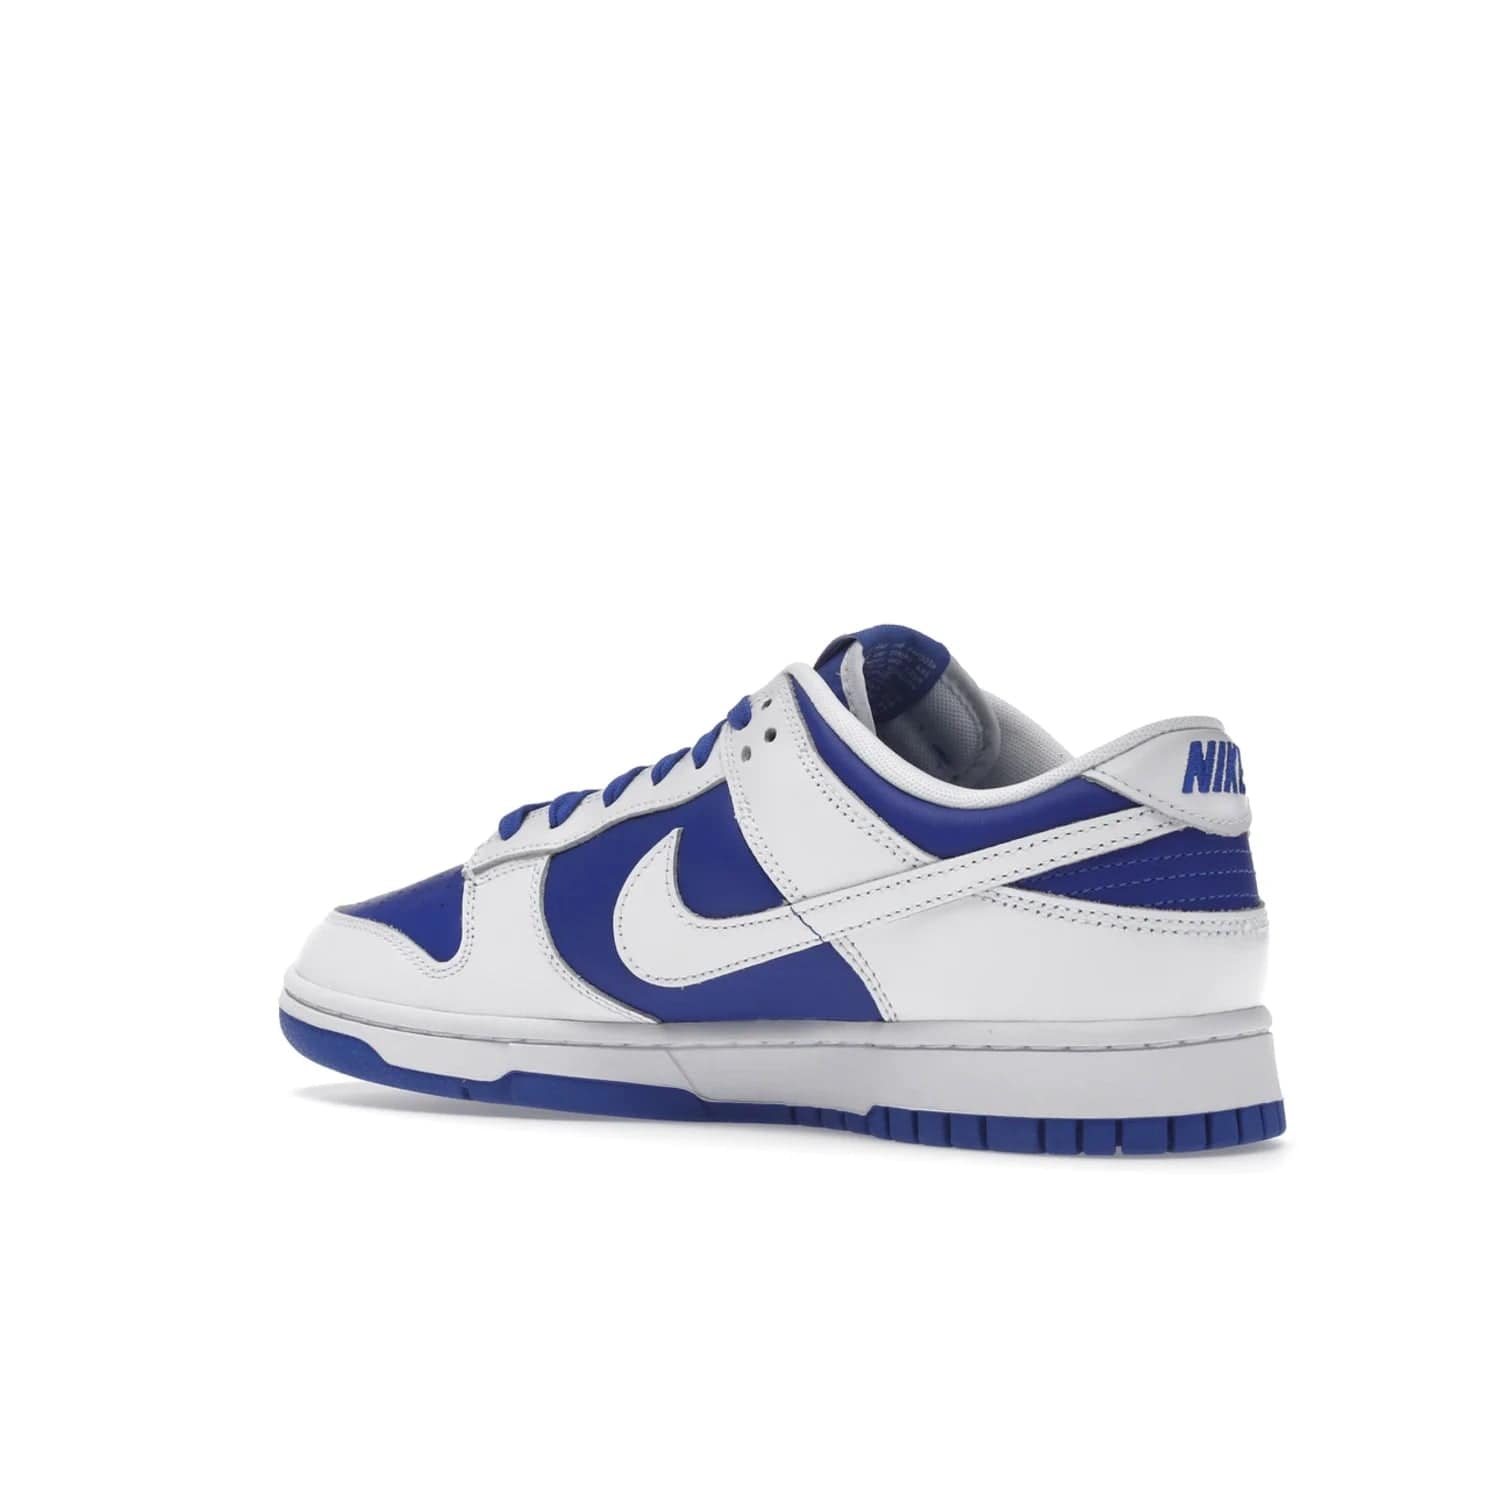 Nike Dunk Low Racer Blue White - Image 23 - Only at www.BallersClubKickz.com - Sleek Racer Blue leather upper and white leather overlays make up the Nike Dunk Low Racer Blue White. Woven tag and heel embroidery for a 1985 Dunk look with a matching EVA foam sole completes the classic colorway.